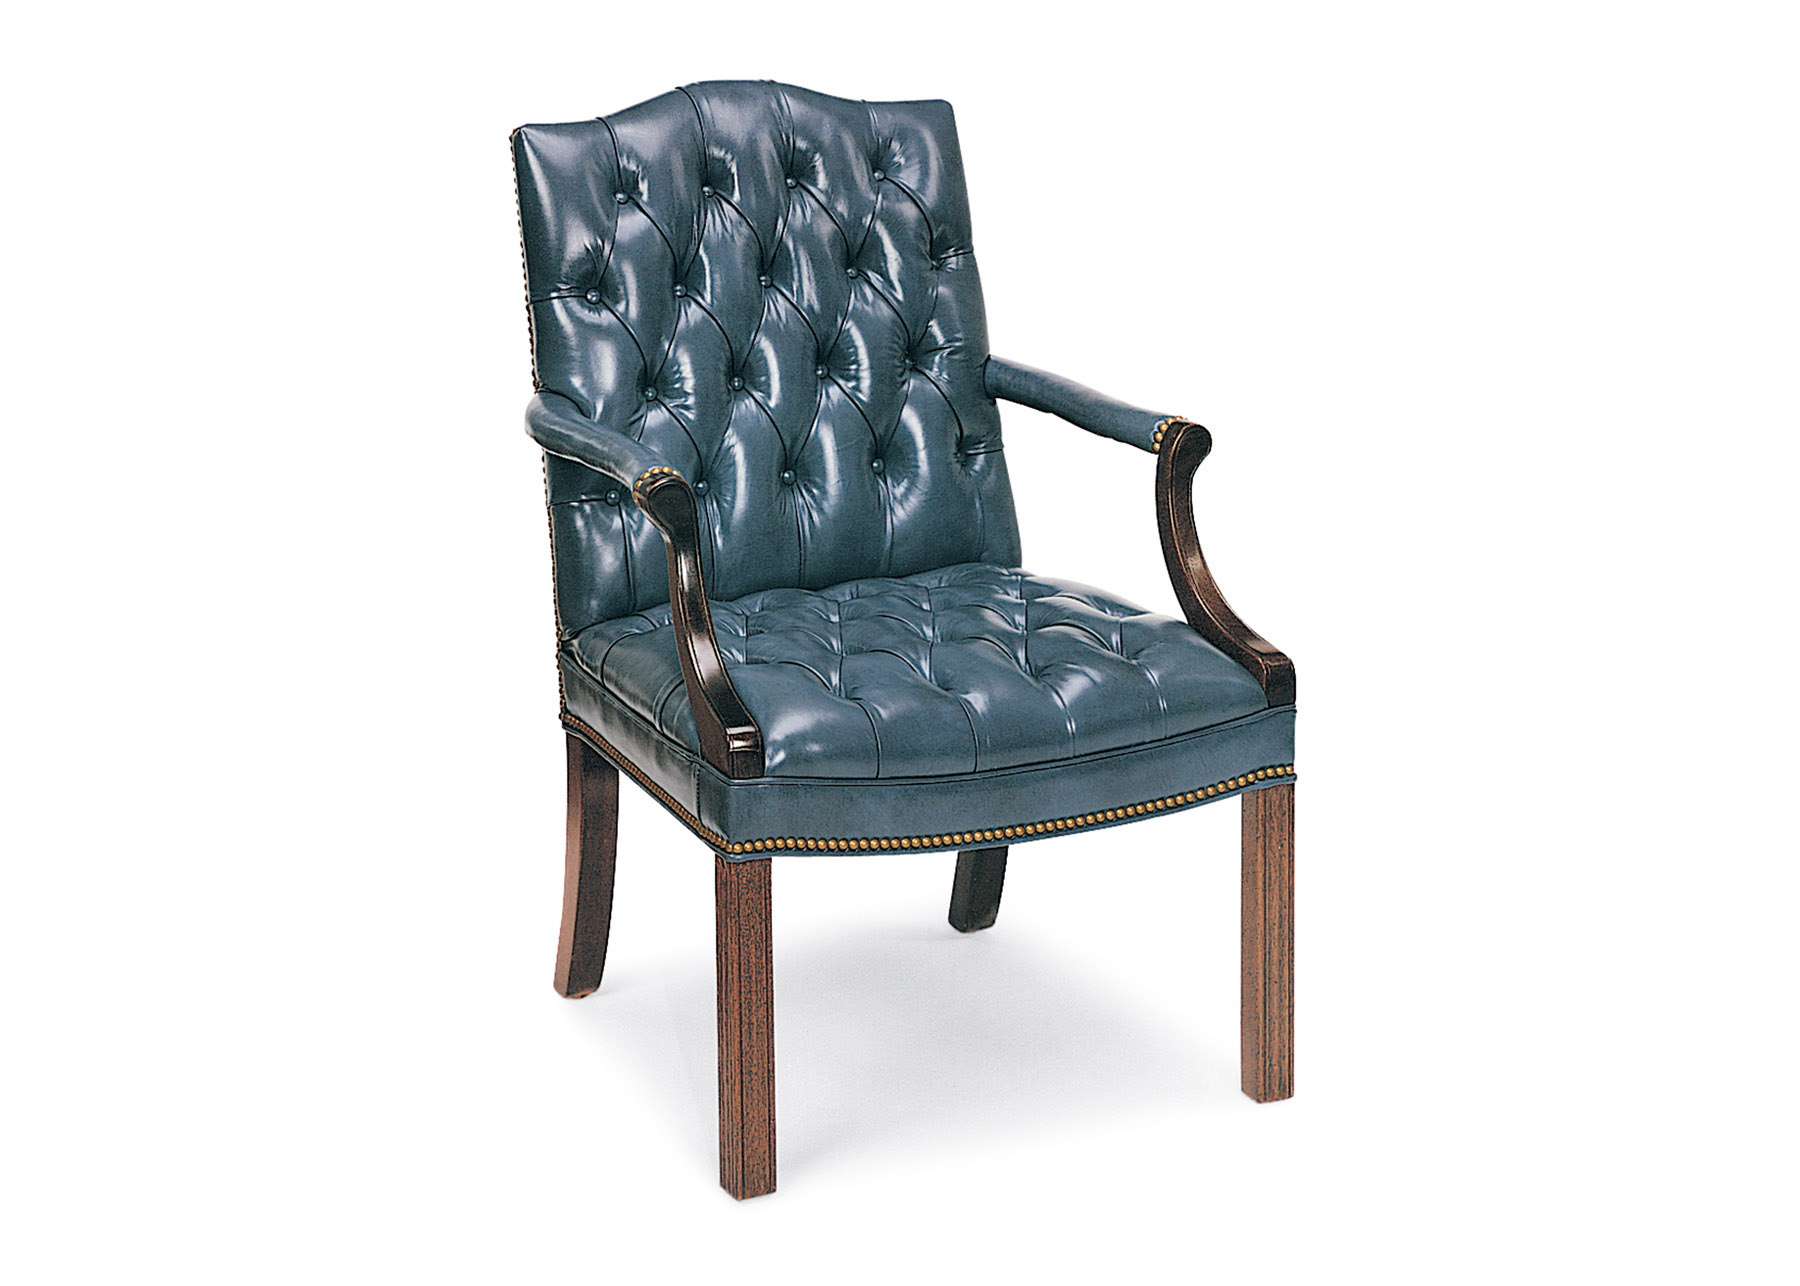  NORFOLK TUFTED SIDE CHAIR